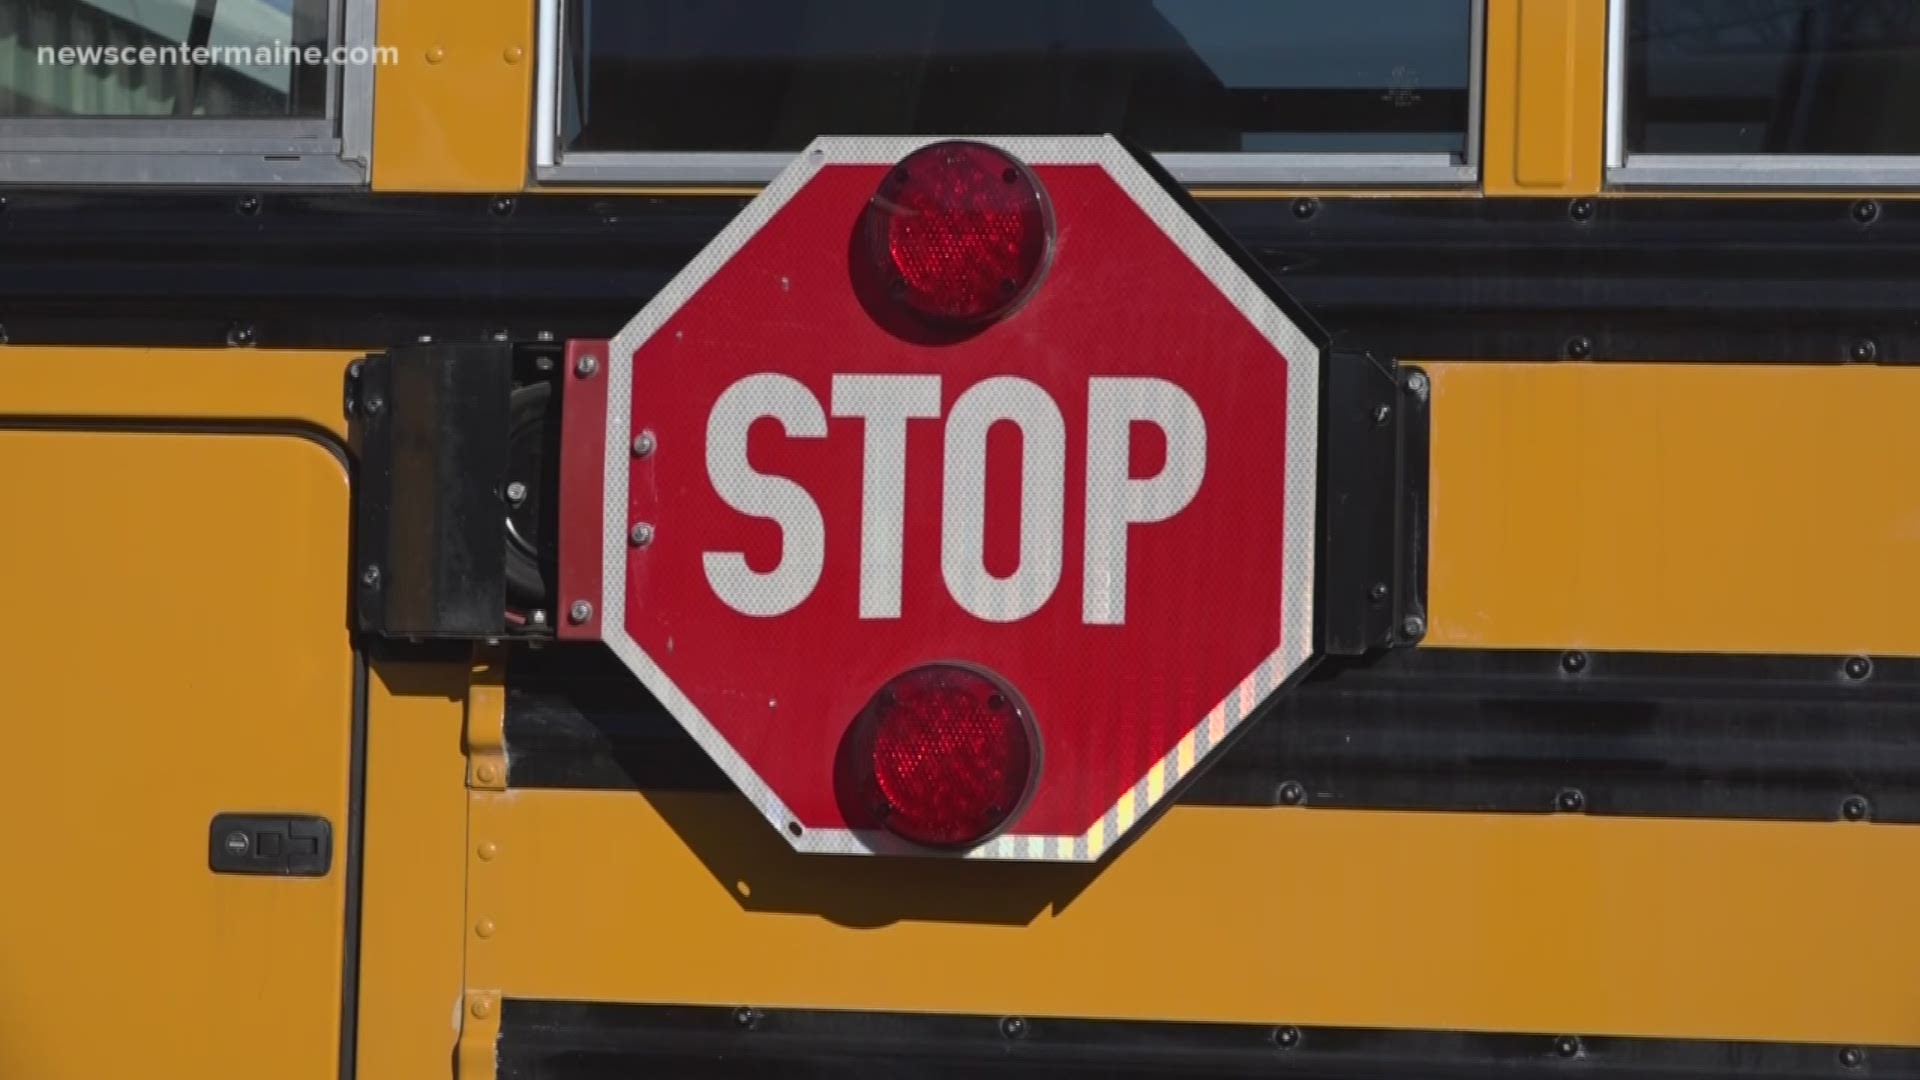 Police say they are seeing more and more incidents of drivers failing to stop for school buses across the state.